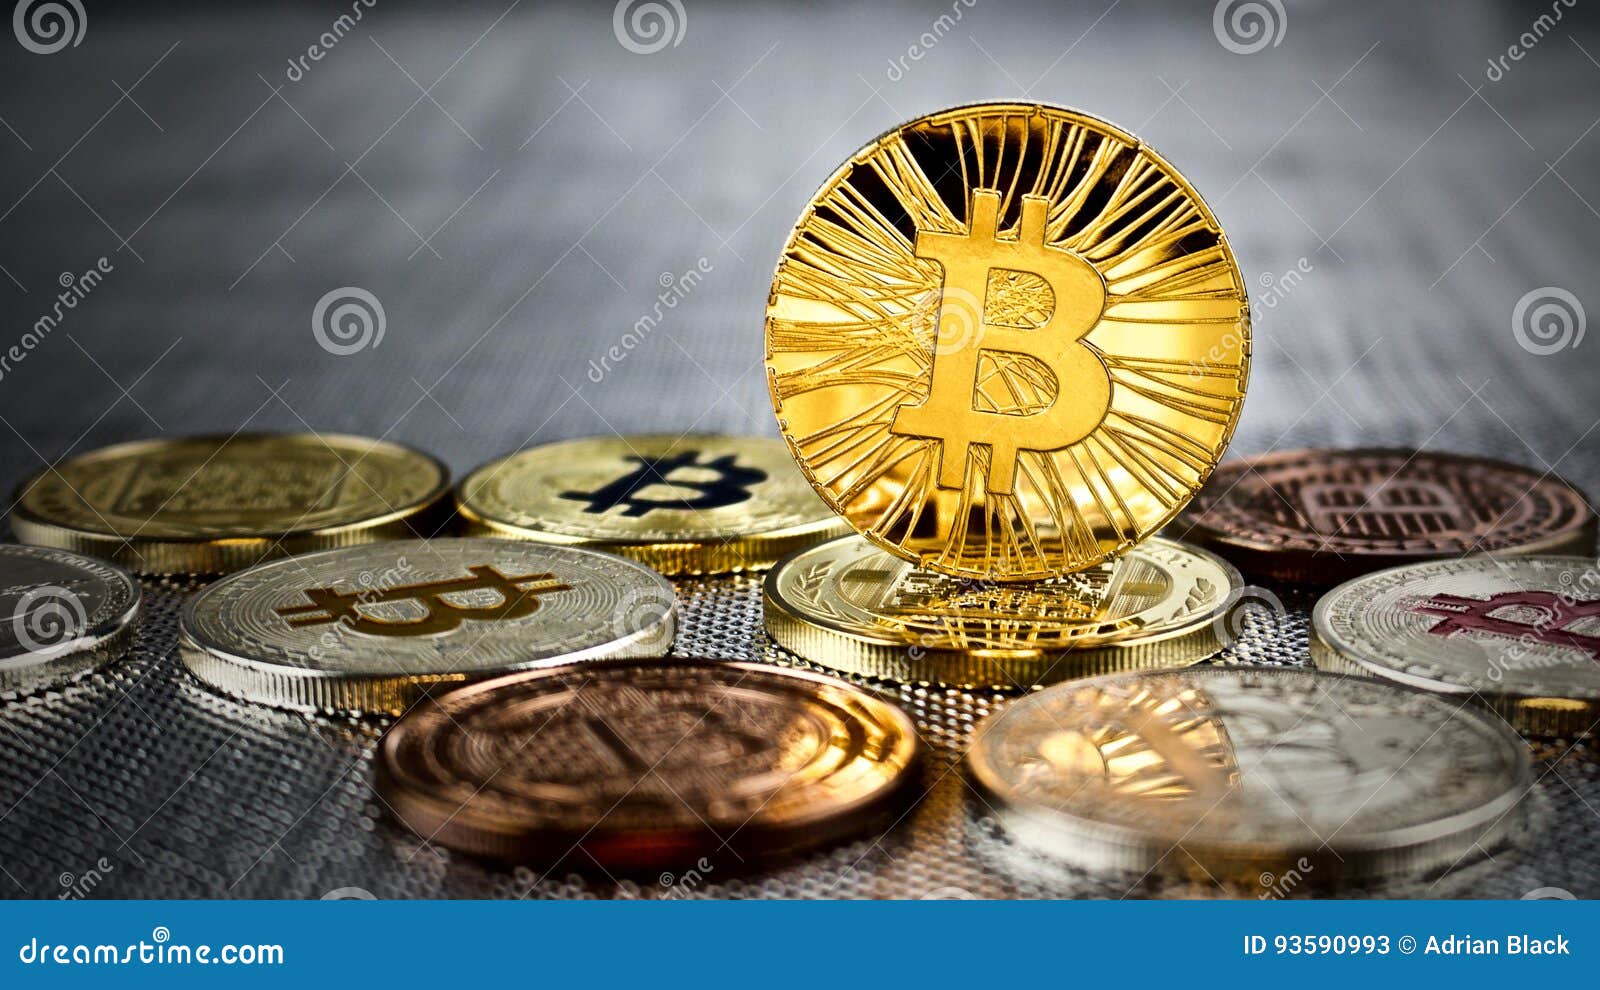 Gold bitcoin coin stock image. Image of bank, cryptocurrency - 93590993